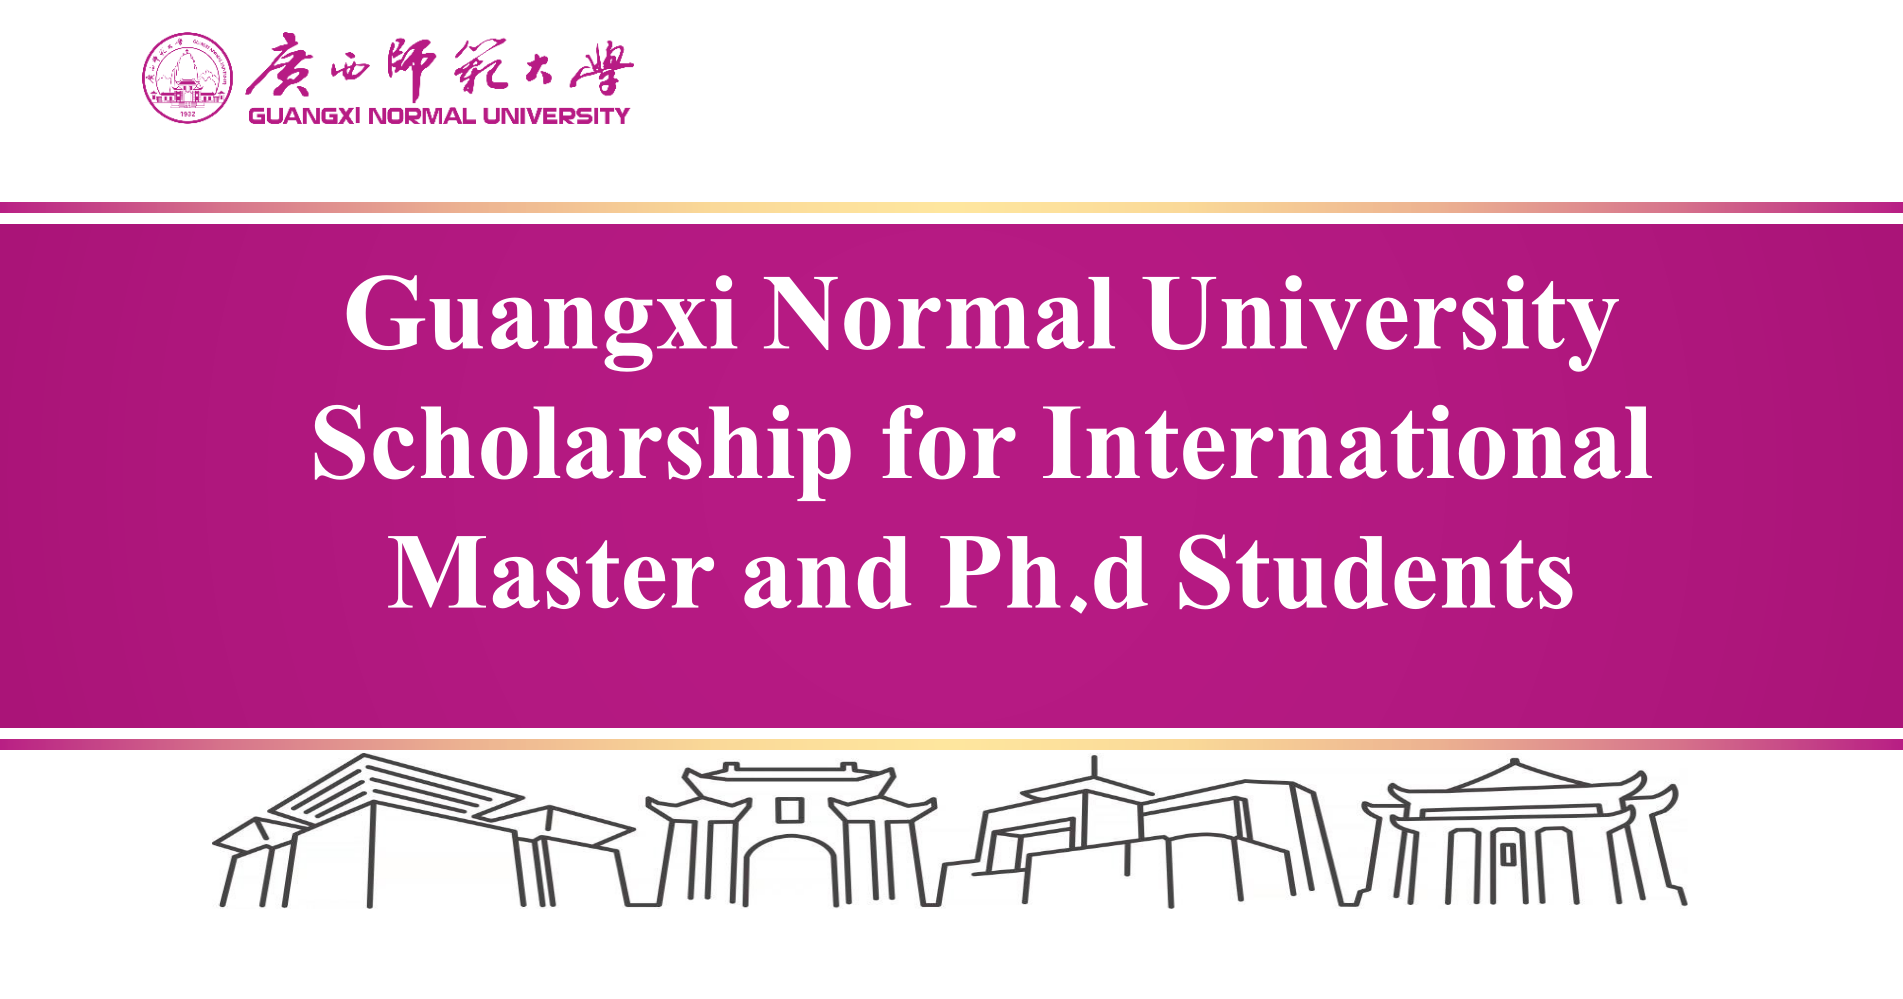 Guangxi Normal University Scholarship for International Master and Ph.d students